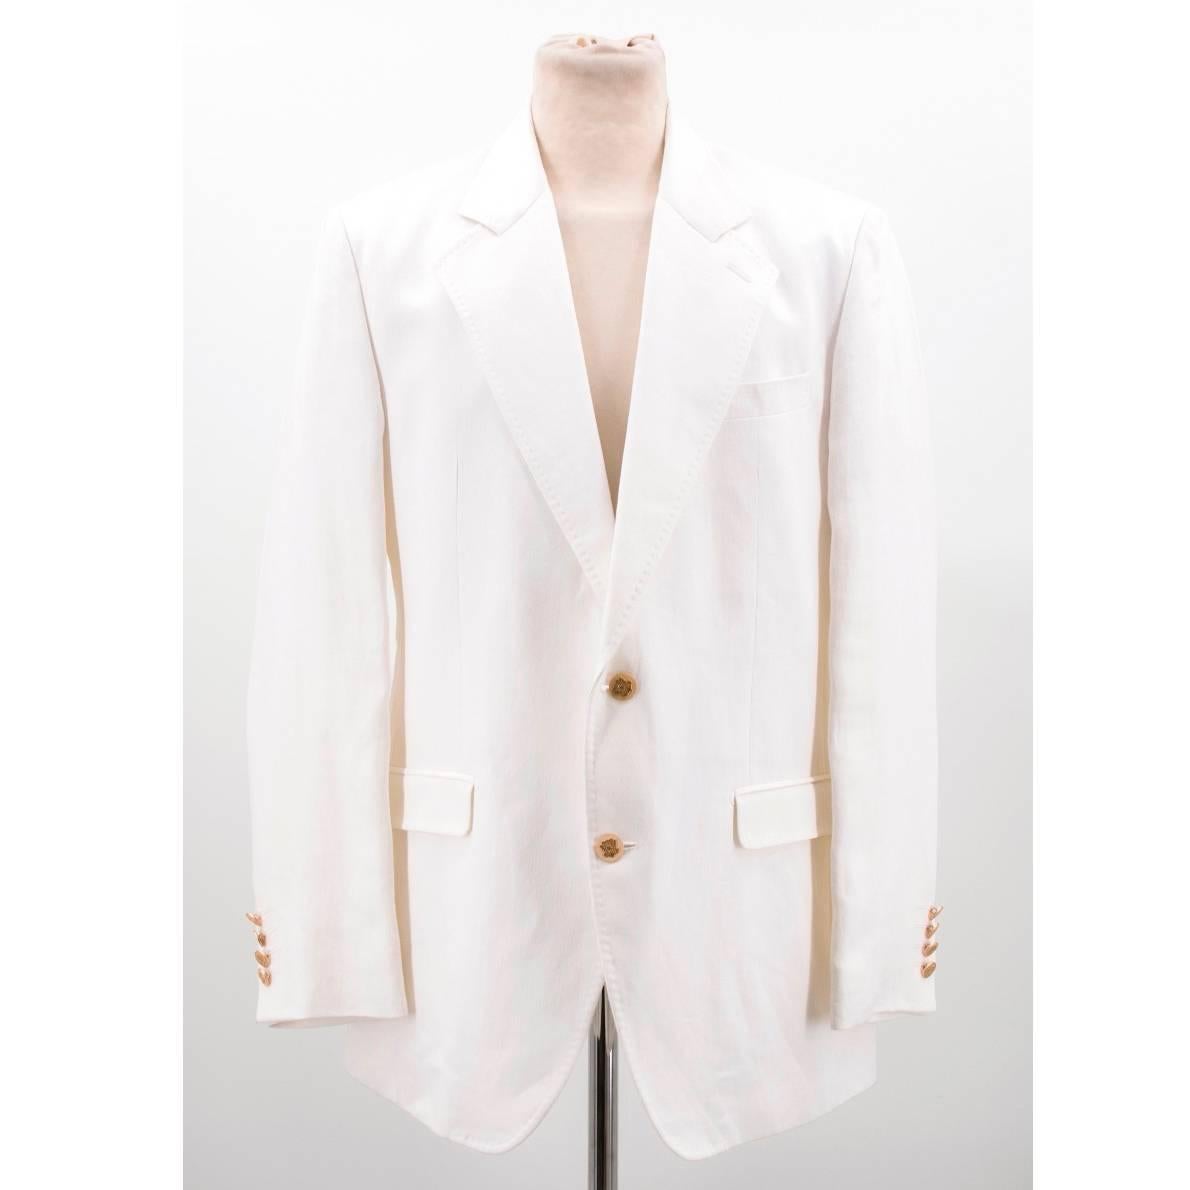 Dolce & Gabbana white jacket in a single-breasted style with notch lapels and light shoulder padding. With stitch effect on the lining of the lapels, one chest pocket and two front flap pockets. 

Size: XL
Measurements: Approx. Shoulder: 46cm